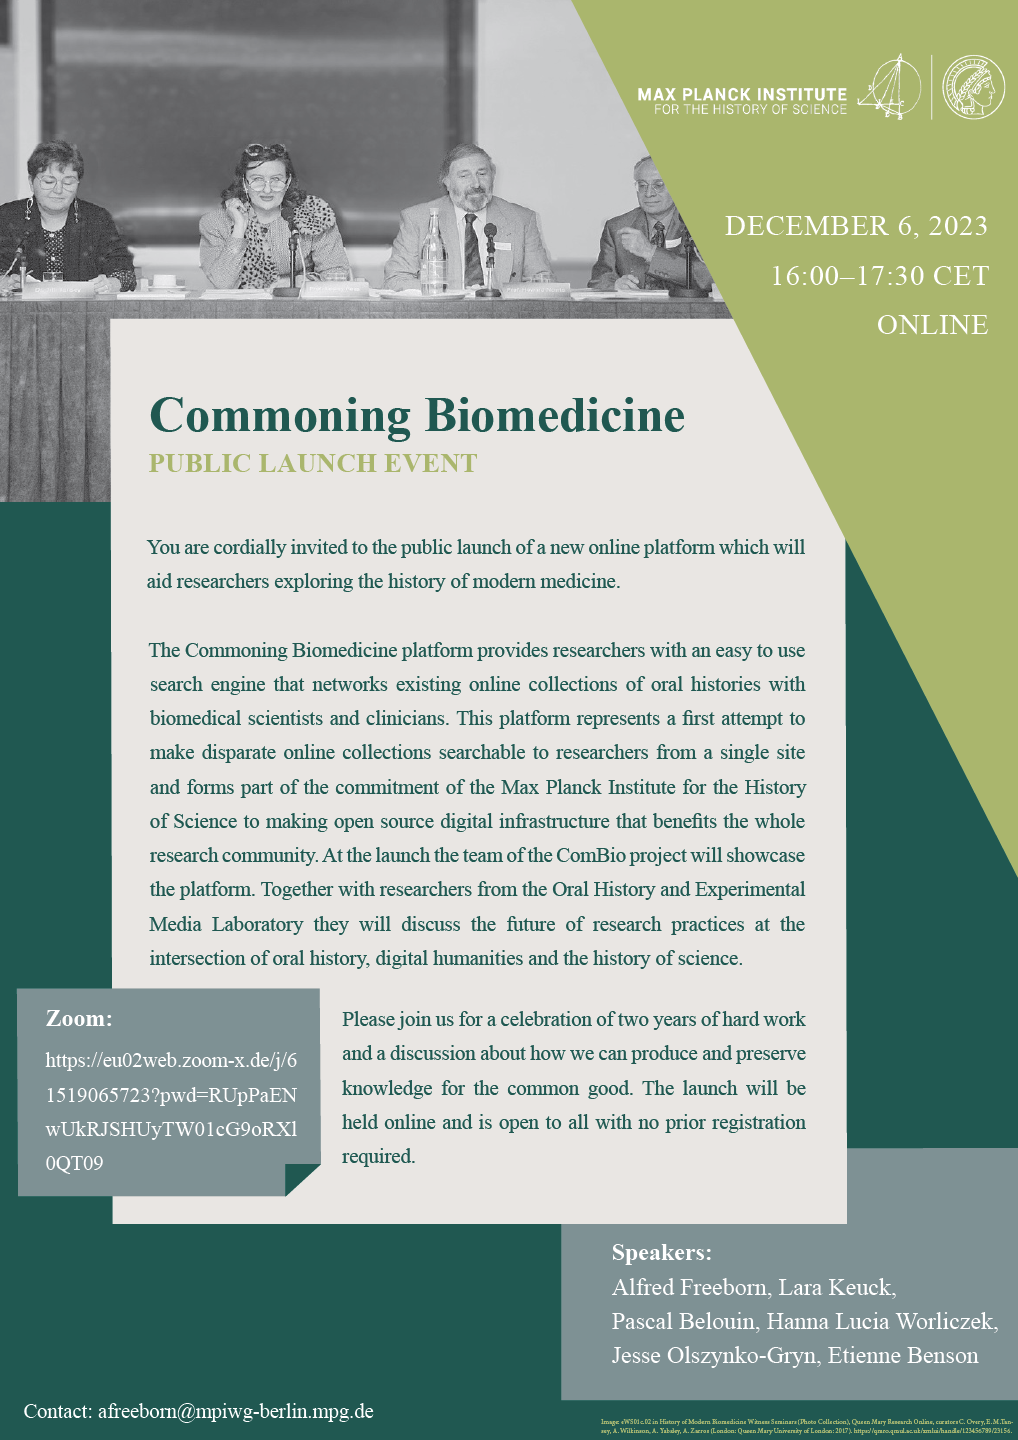 Flyer of the Commoning Biomedicine Public Launch Event (all information provided on the page)